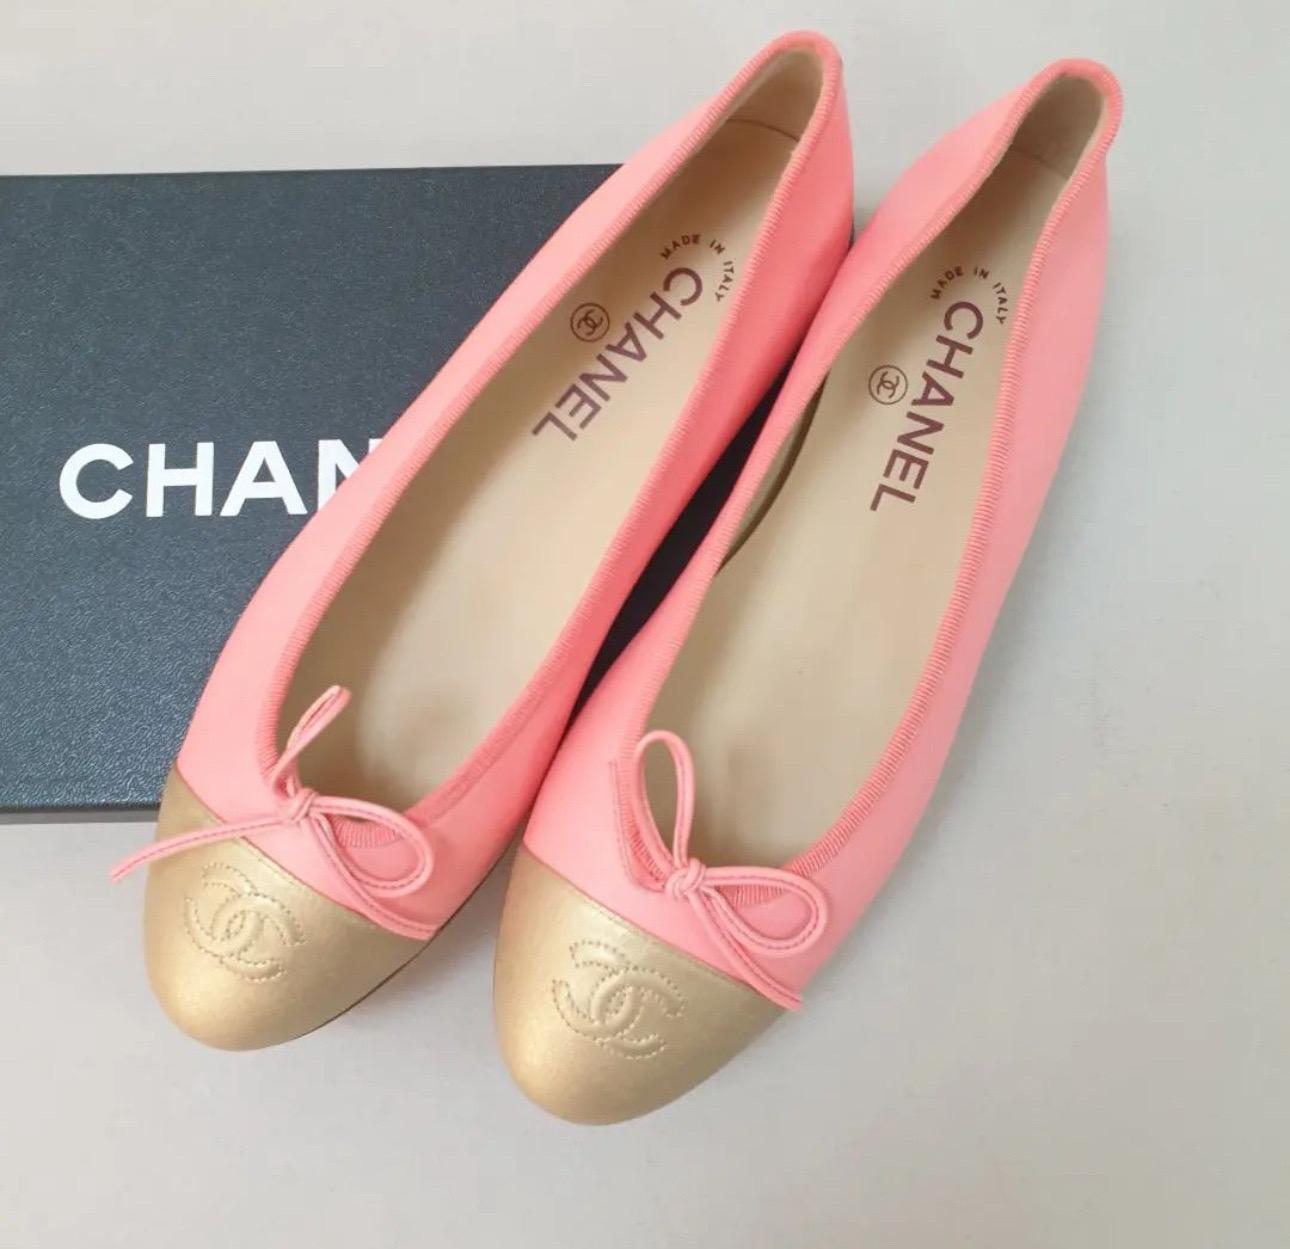 These classic and versatile Chanel Cap Toe CC Ballet Flats are iconic and must-haves for any fashionista. Luxurious smooth coral pink leather uppers with gold leather cap toes and a small embroidered CC logo and grosgrain fabric trim set these